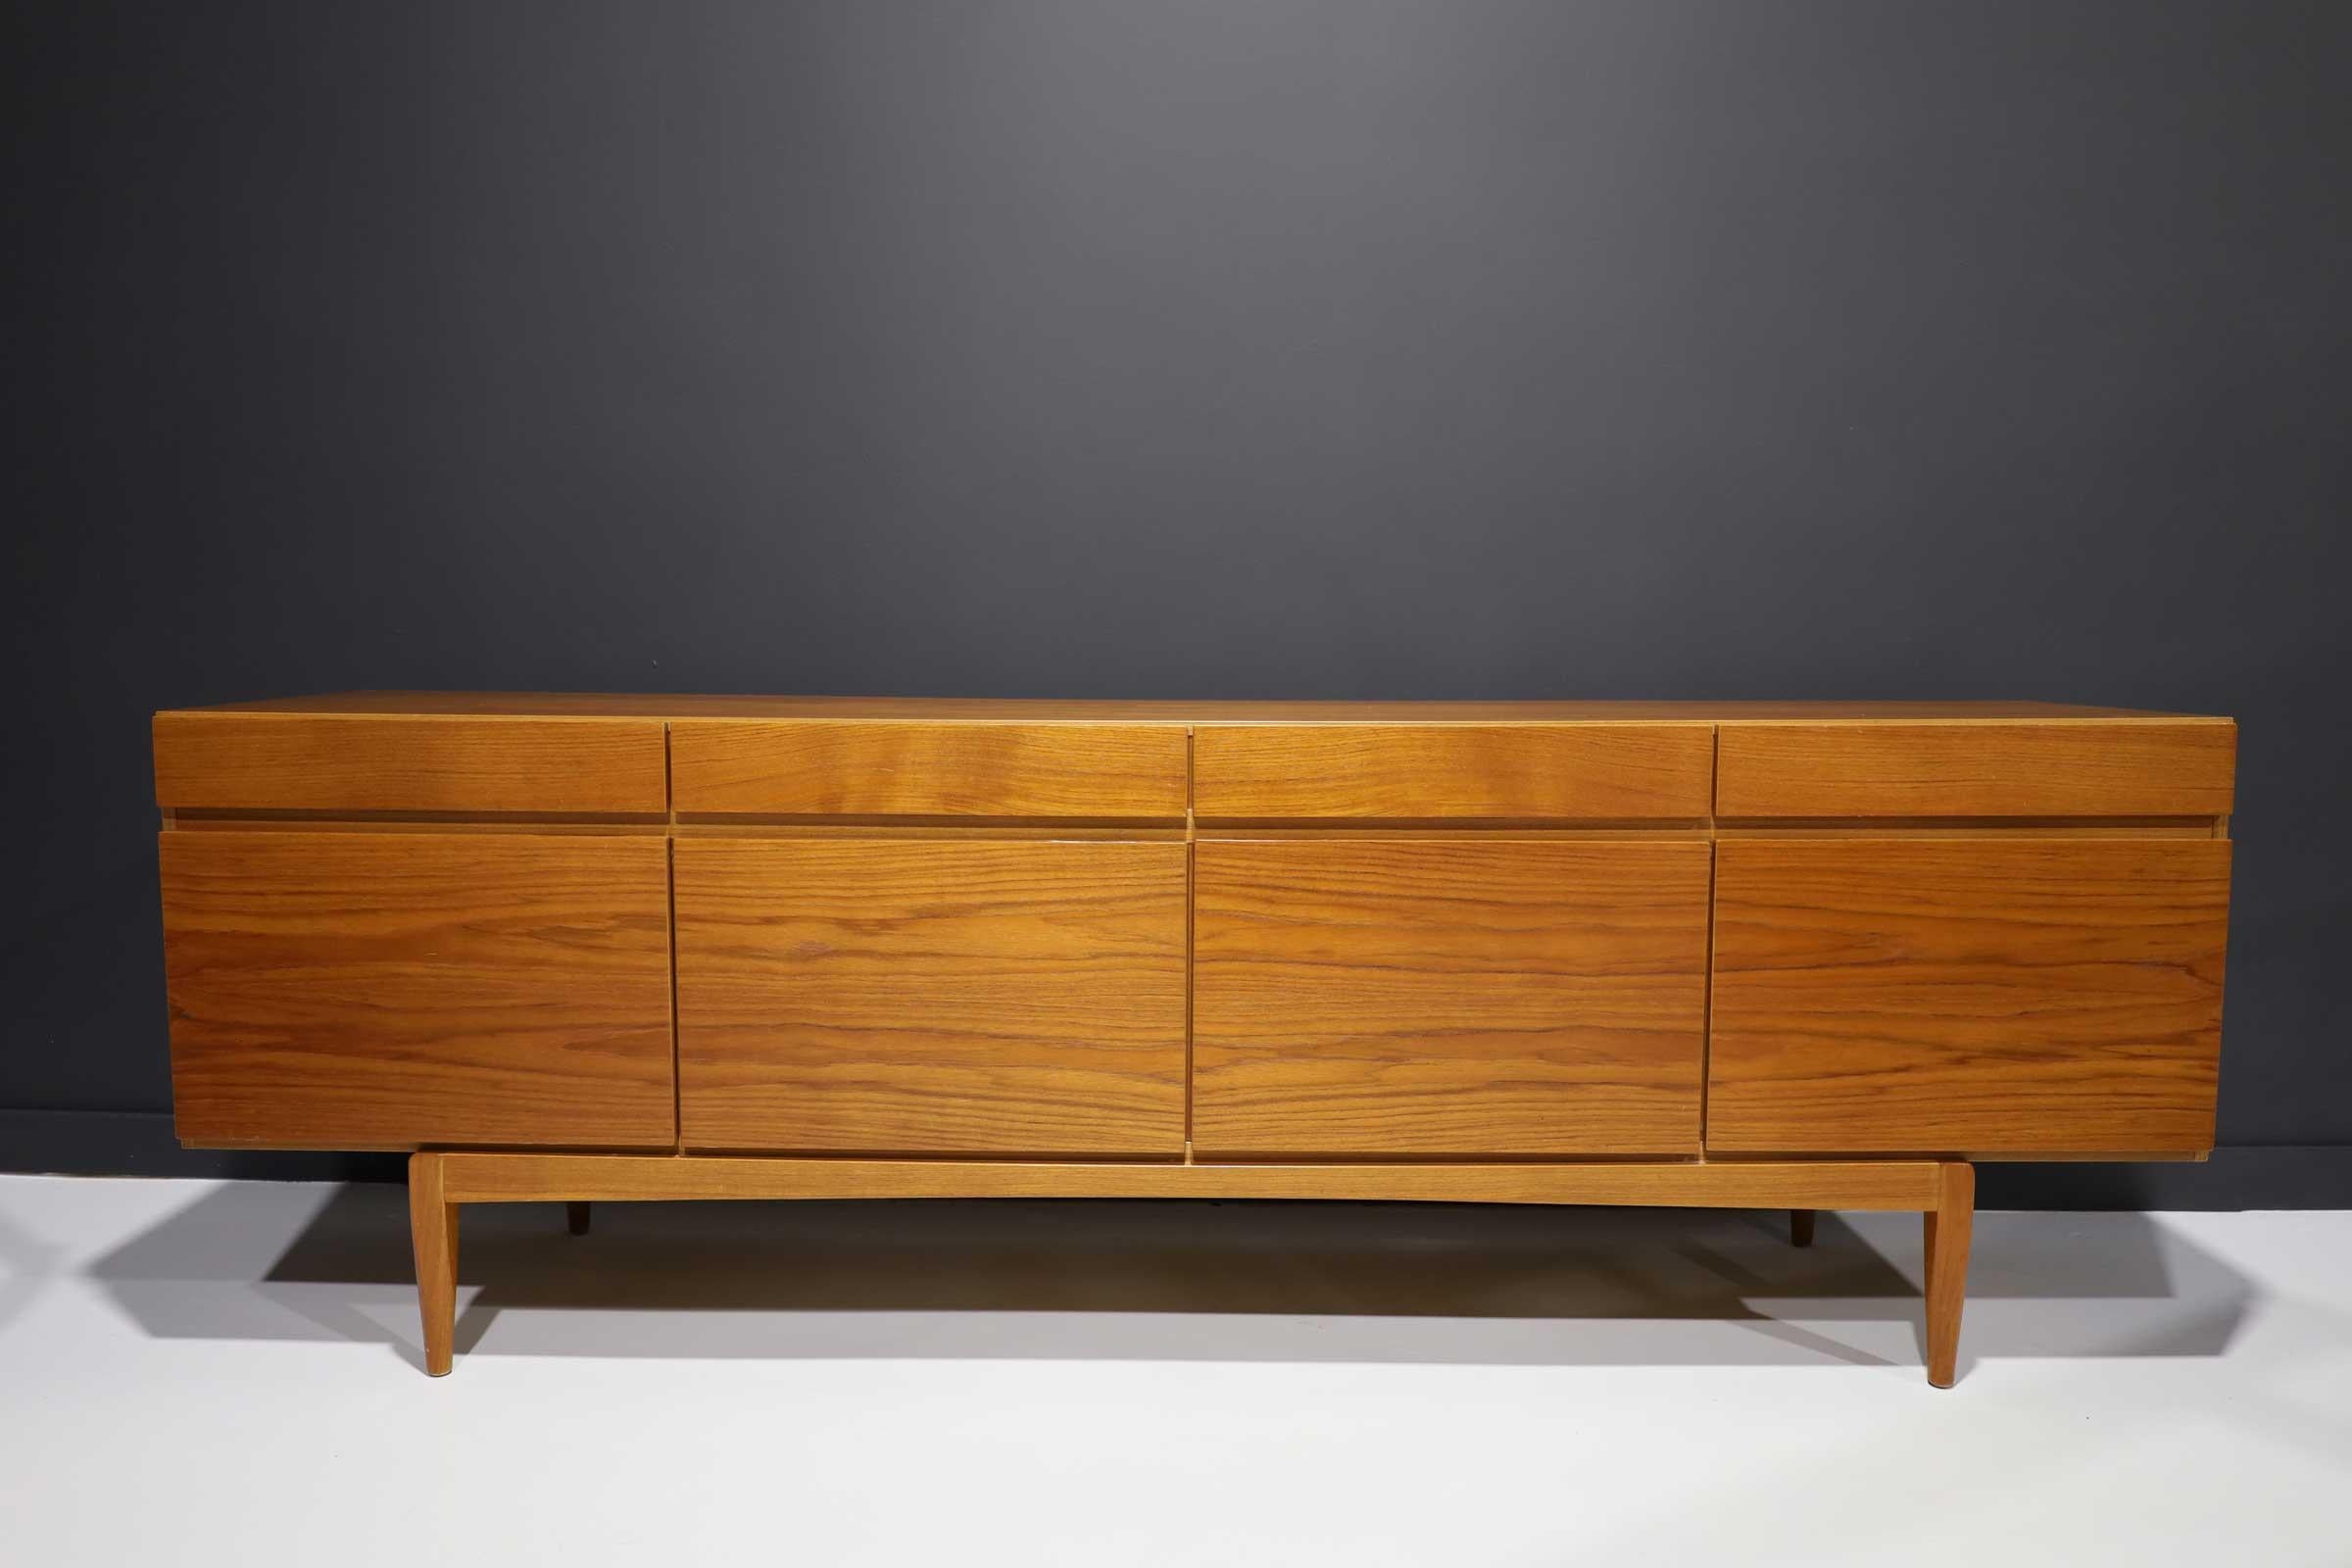 This stately teak sideboard, model 66, by Ib Kofod-Larsen is solidly constructed, with minimal, clean lines. Set on a raised base, the case provides ample storage. Four roomy drawers are aligned above four doors; five felt-lined cutlery drawers